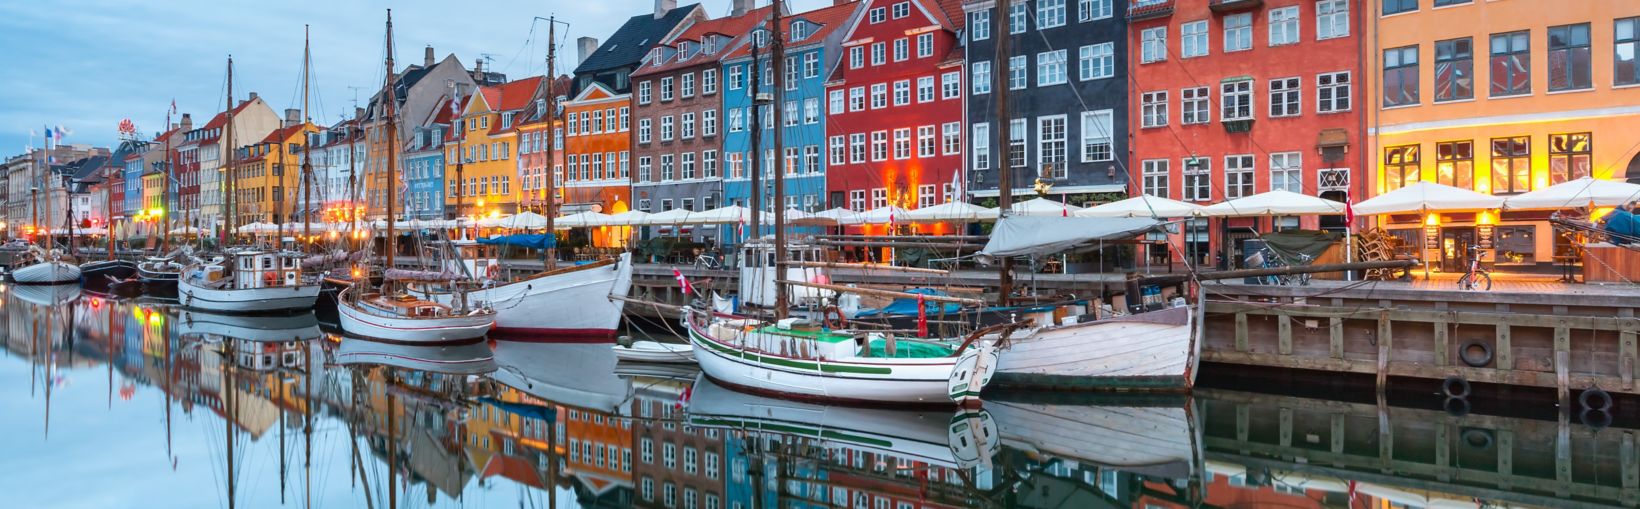 Nyhavn with colorful facades of old houses and old ships in the Old Town of Copenhagen, capital of Denmark.